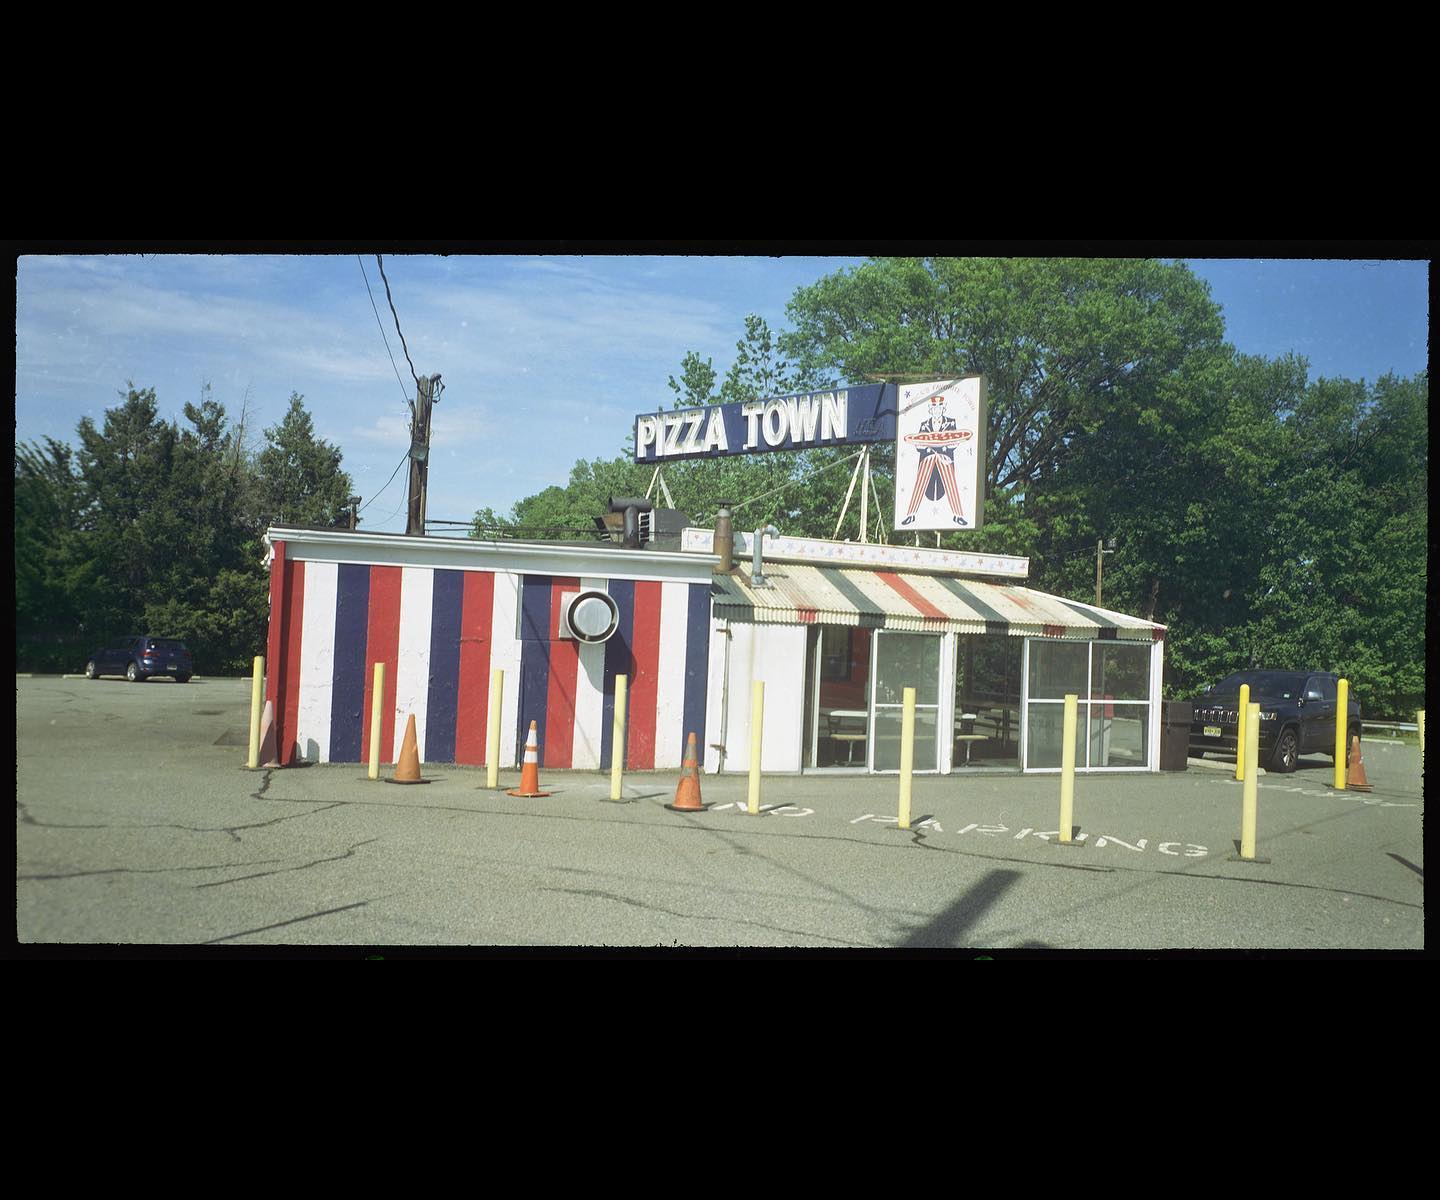 Pizza Town

Another shot on @cinestillfilm 50D developed in ECN-2 sourced from @allthroughalens.podcast and shot with my #kraken612 3D-printed camera, designed by @grahamhomemadecamera. Graham suggests using a bubble level with the camera, because shots are a little wonky in this format when theyâre not level. I would have to agree, as evidenced by this shot. #film #filmphotography #filmphotographypodcast #allthroughalenspodcast #homemadecamerapodcast #shootfilmstaybroke